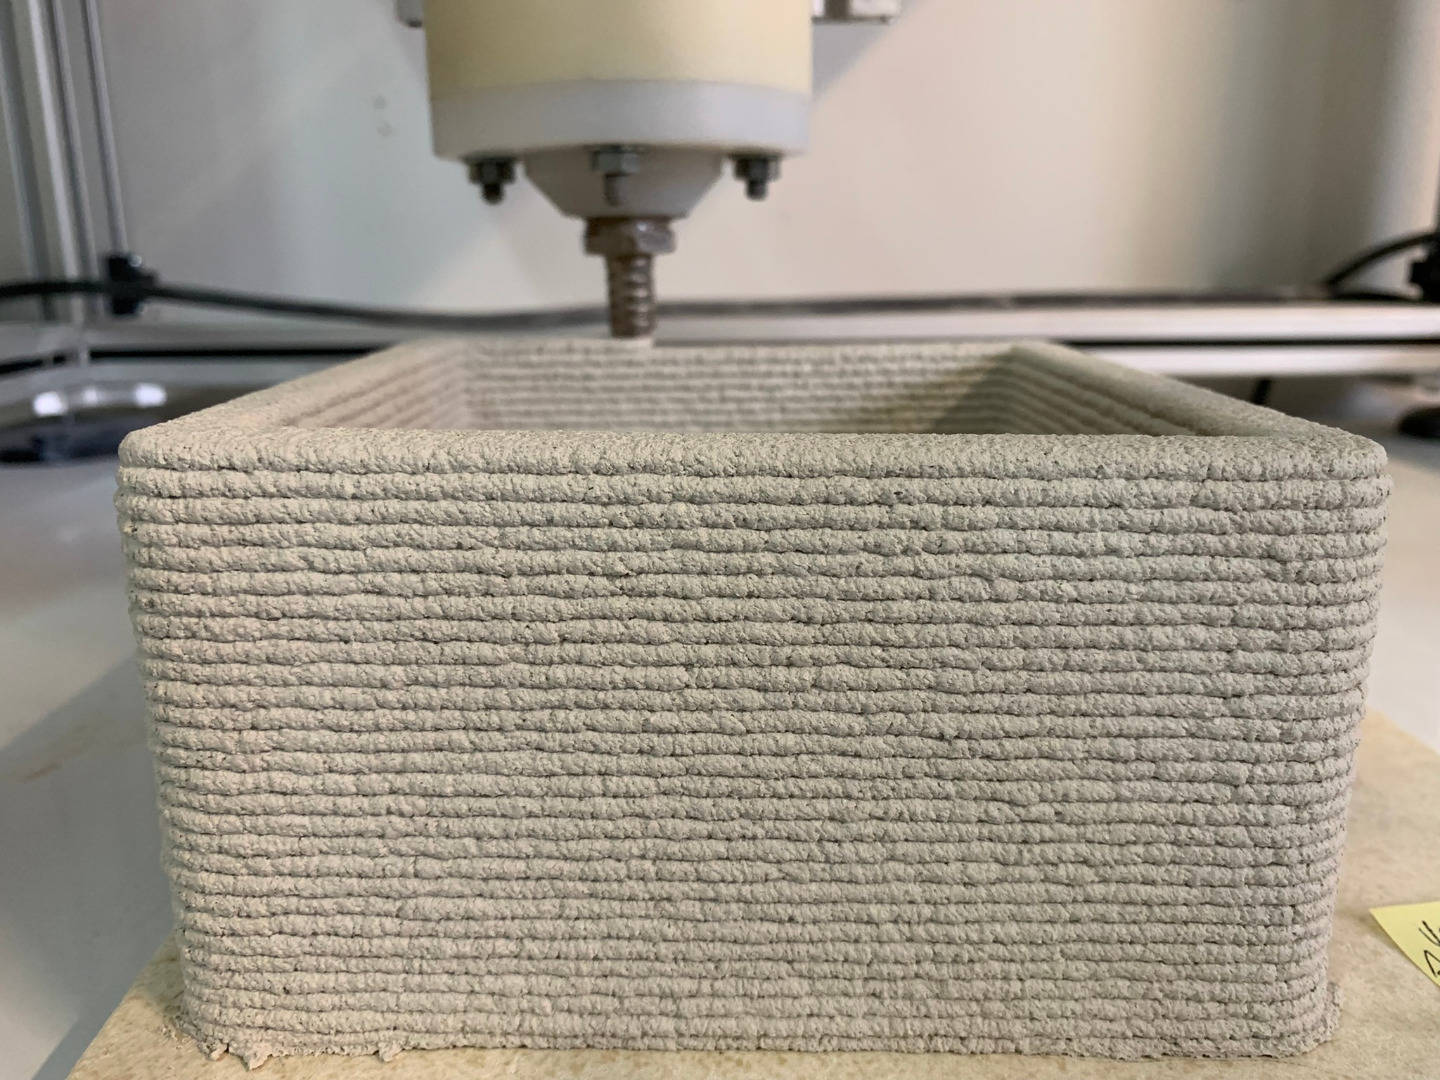 3D printing of a refractory body